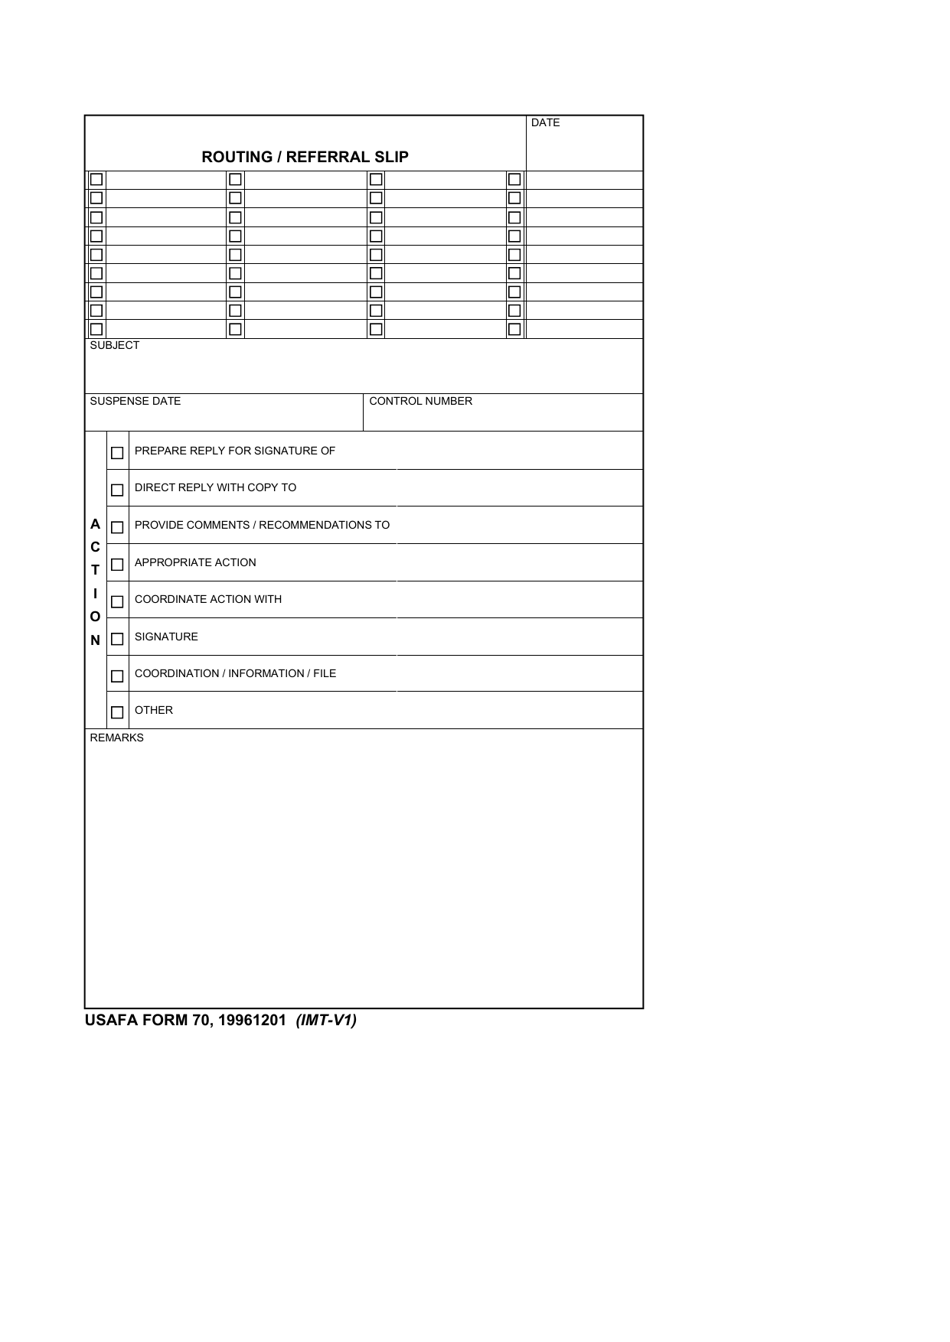 USAFA Form 70 Routing / Referral Slip, Page 1